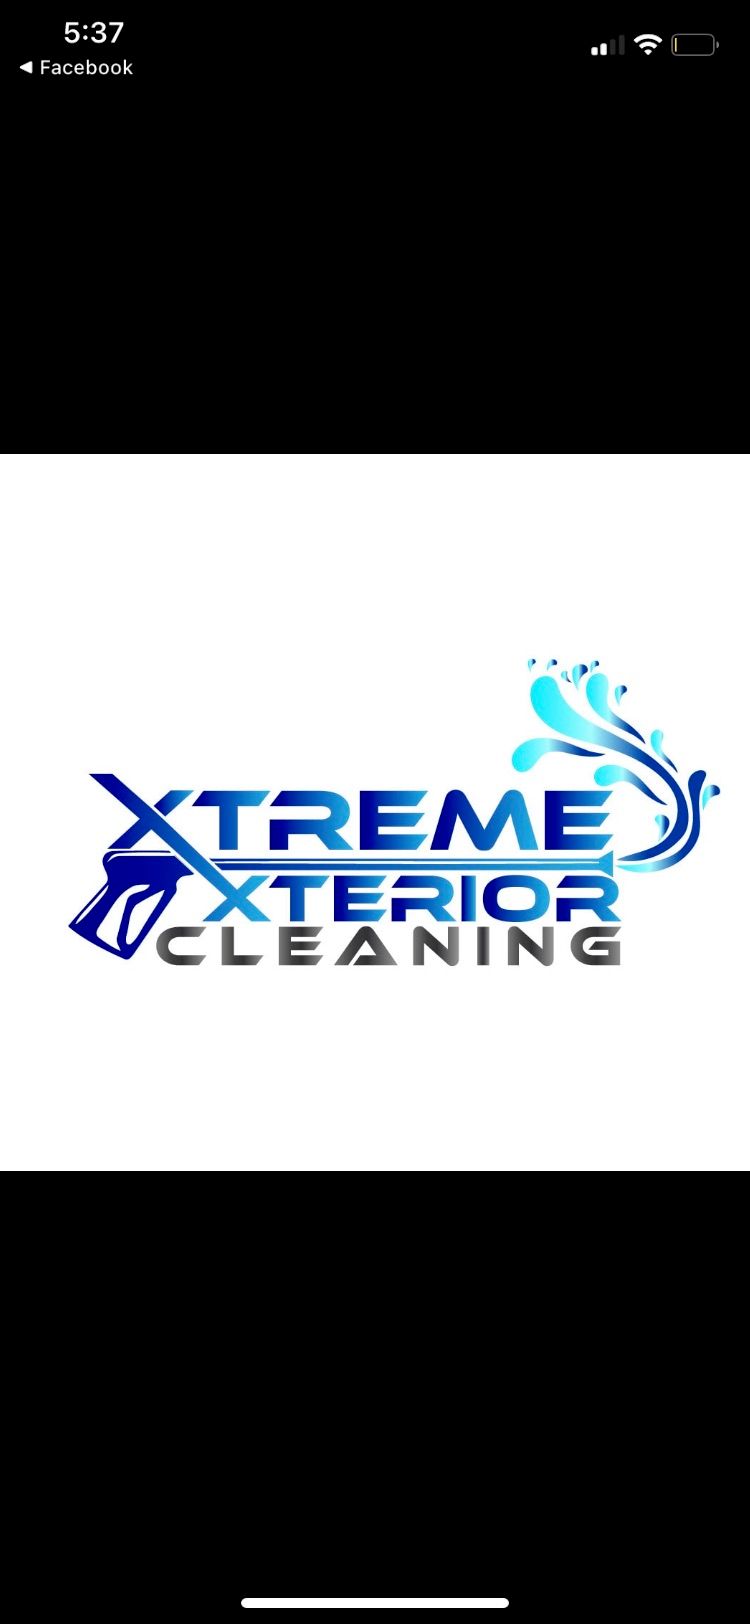 Xtreme Xterior Cleaning LLC